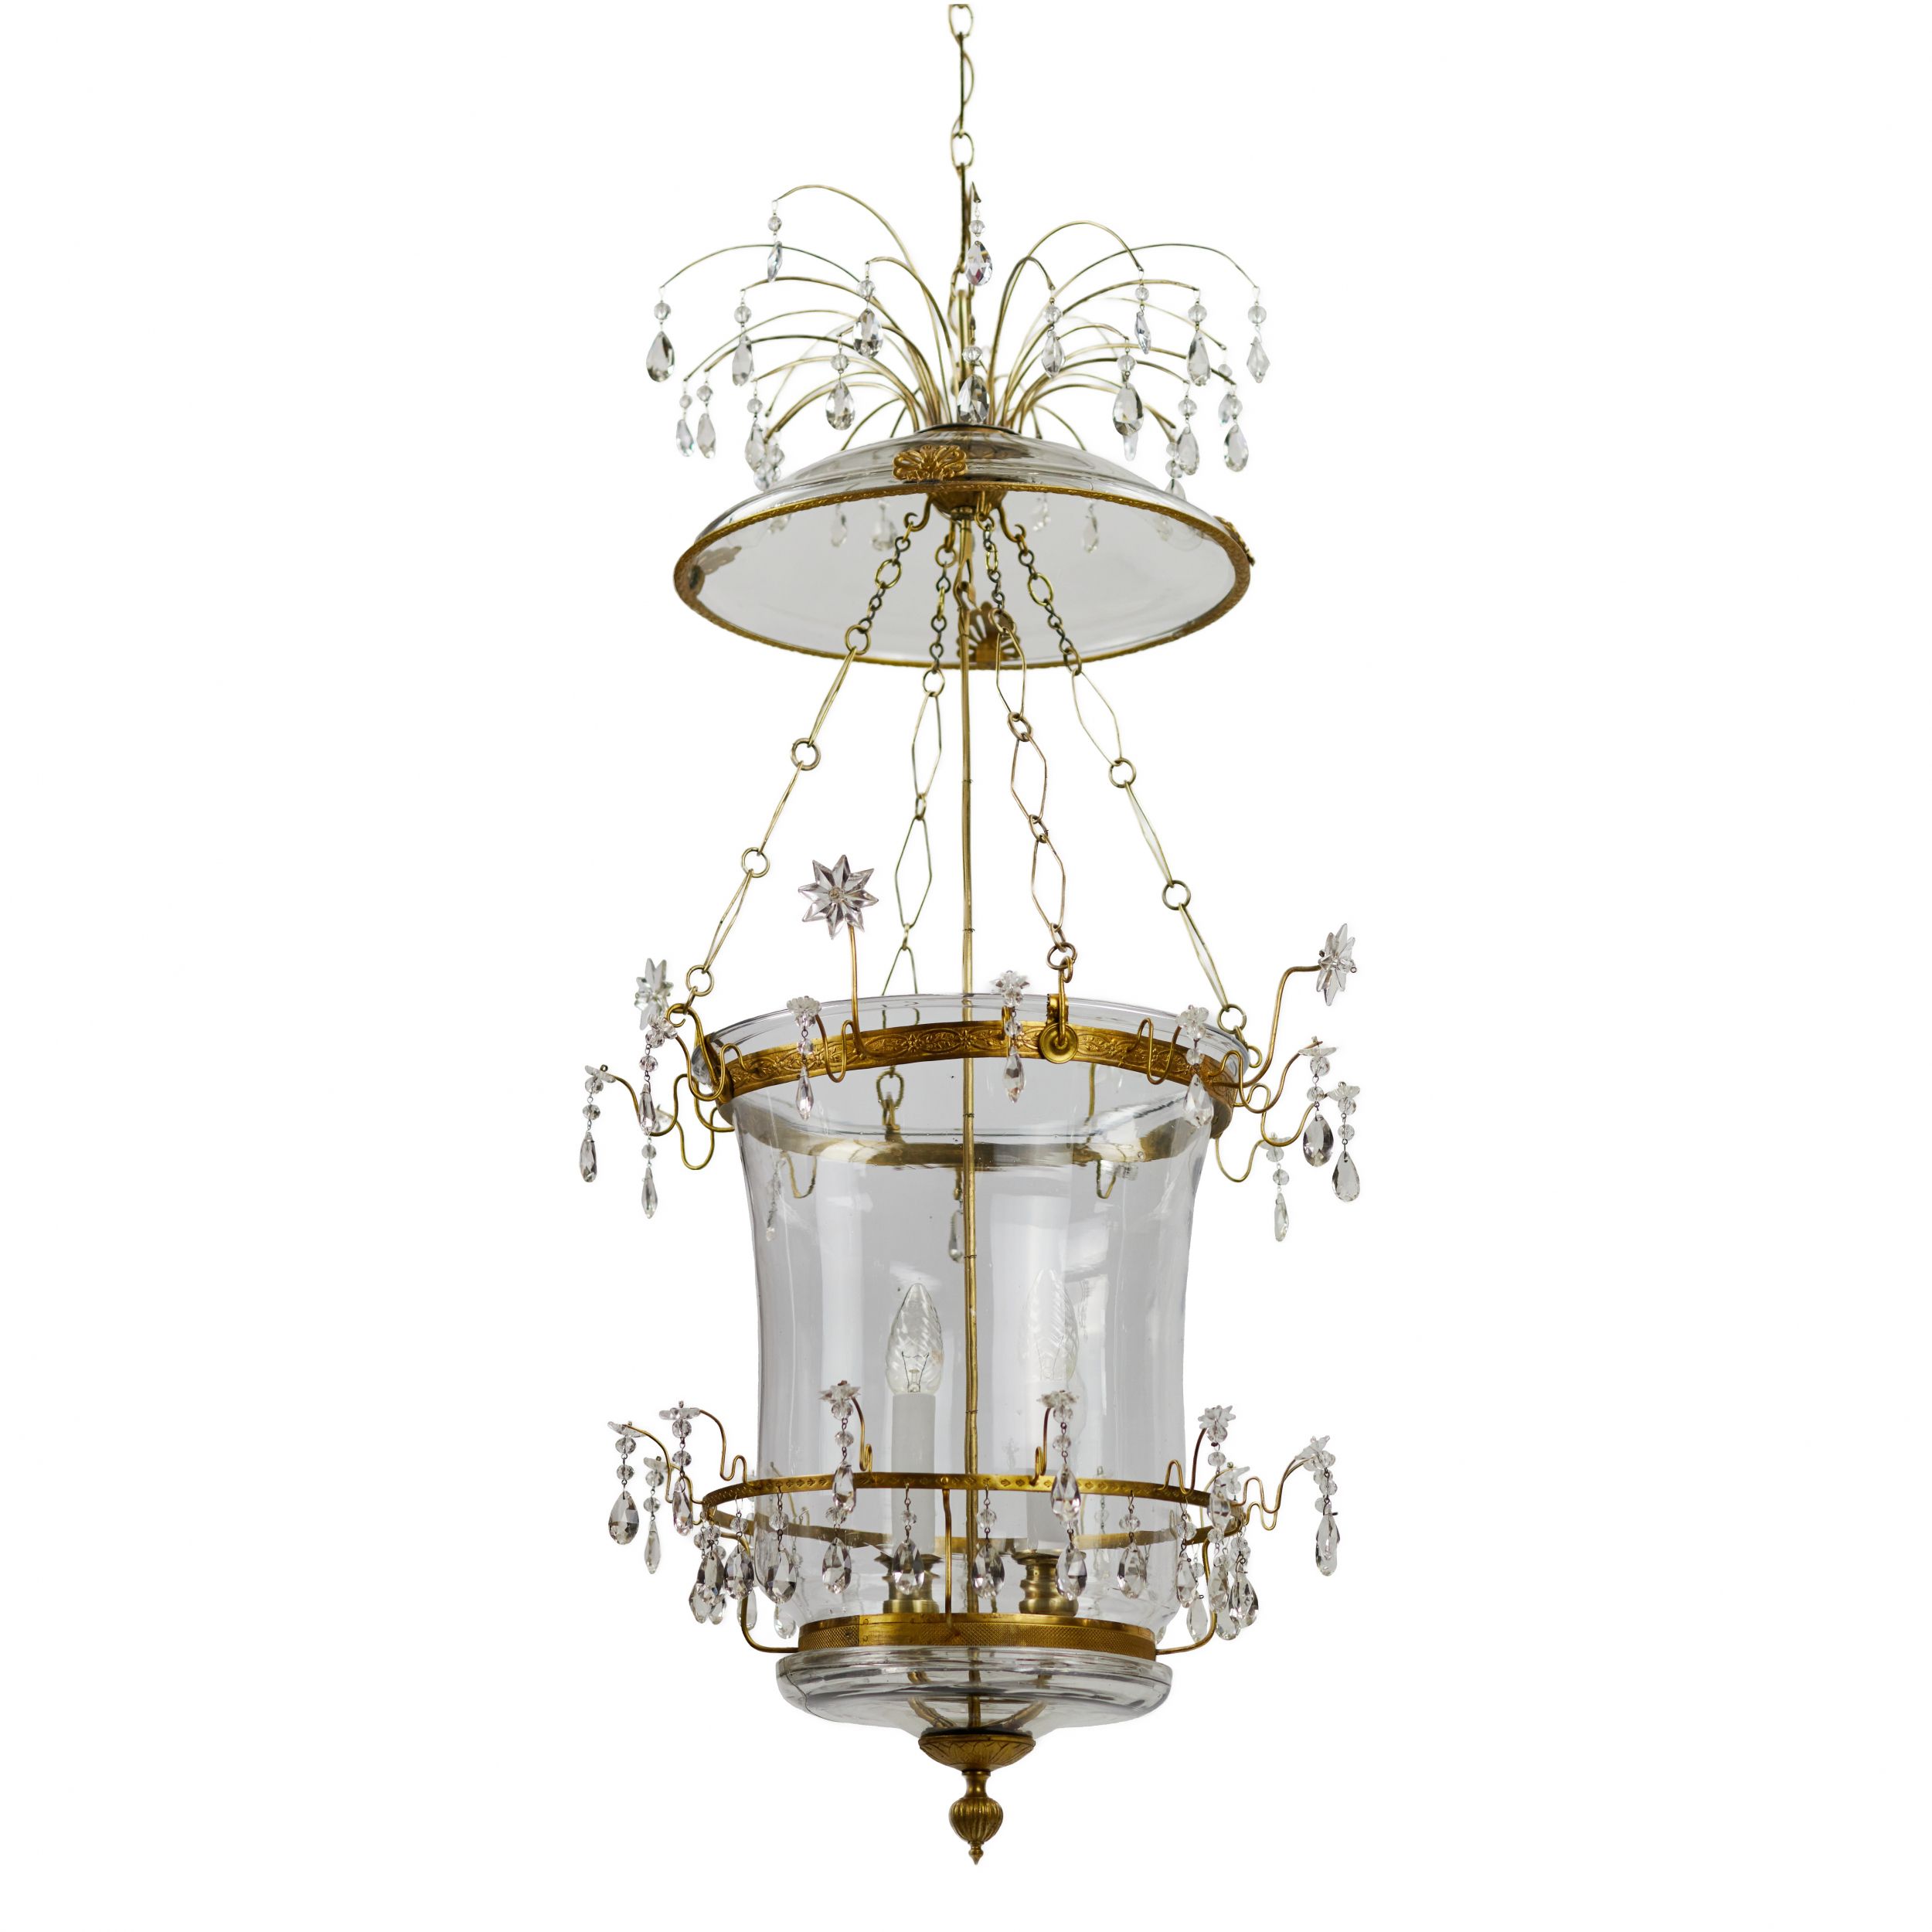 Russian Crystal & Ormolu Mounted Two-Light Lantern Chandelier.Russia, early 19th century. - Image 3 of 5